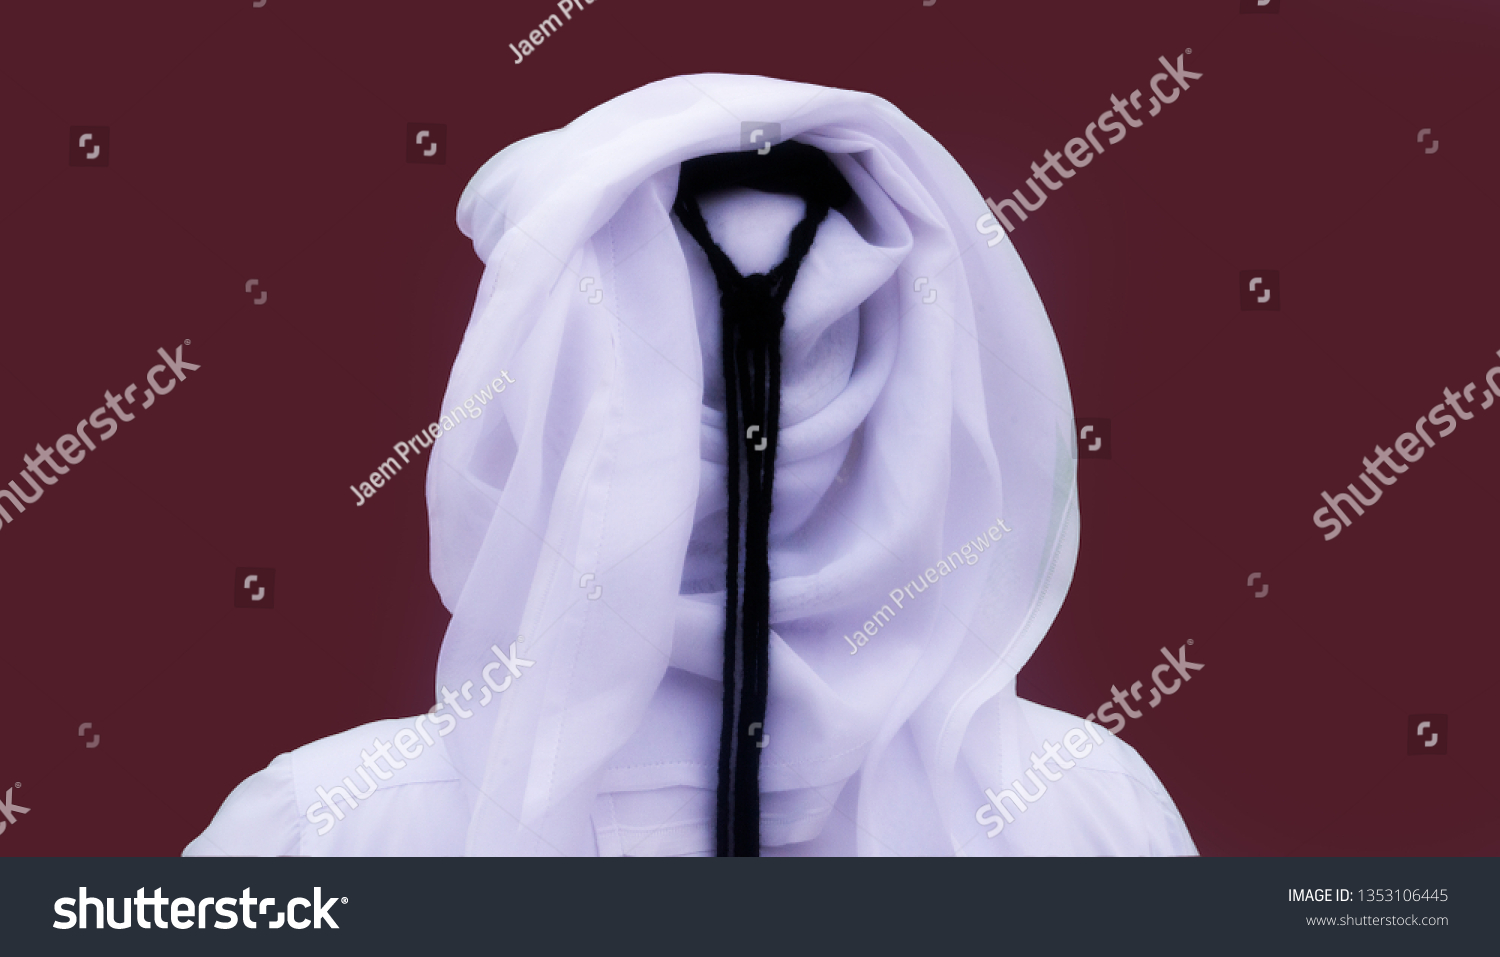 Portrait of an unknown Qatari man from behind in a traditional uniform isolated on maroon background #1353106445